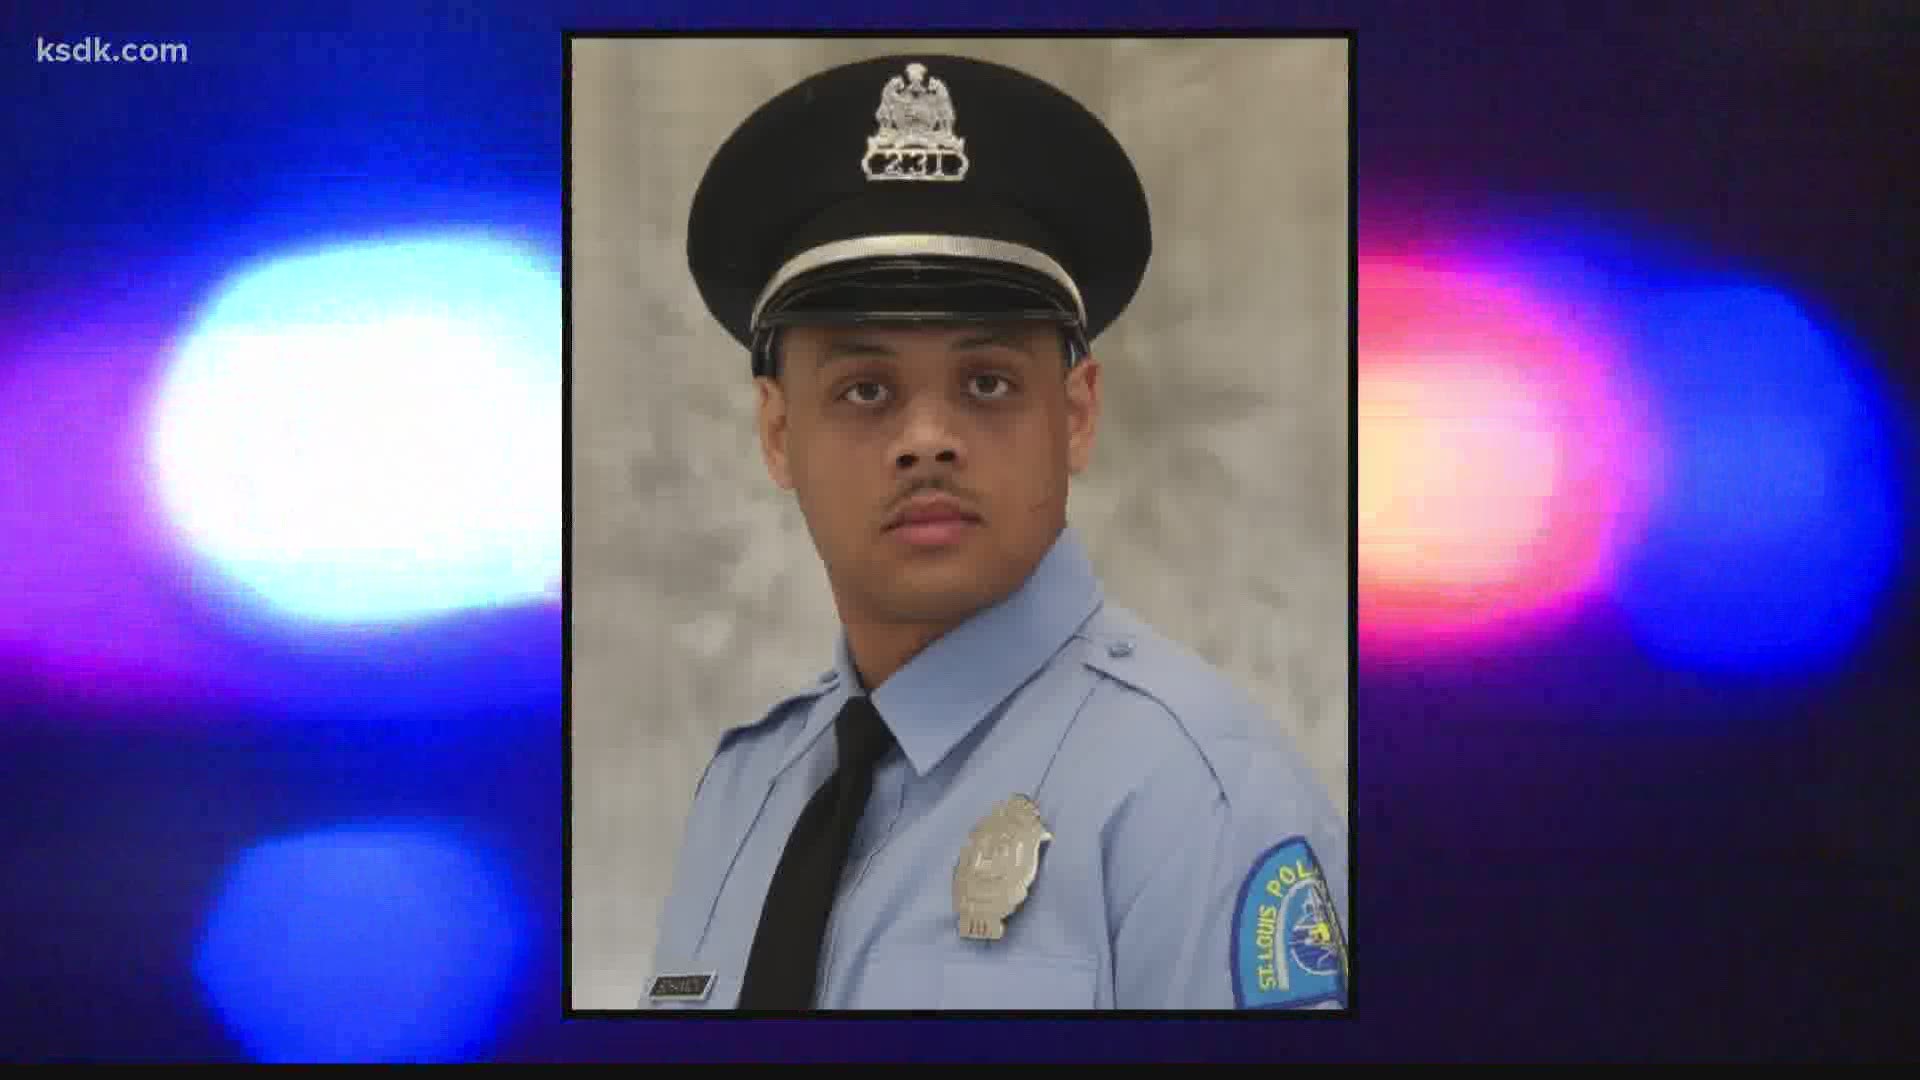 Officer Tamarris Bohannon died Sunday night after being shot in the head while responding to a call Saturday evening